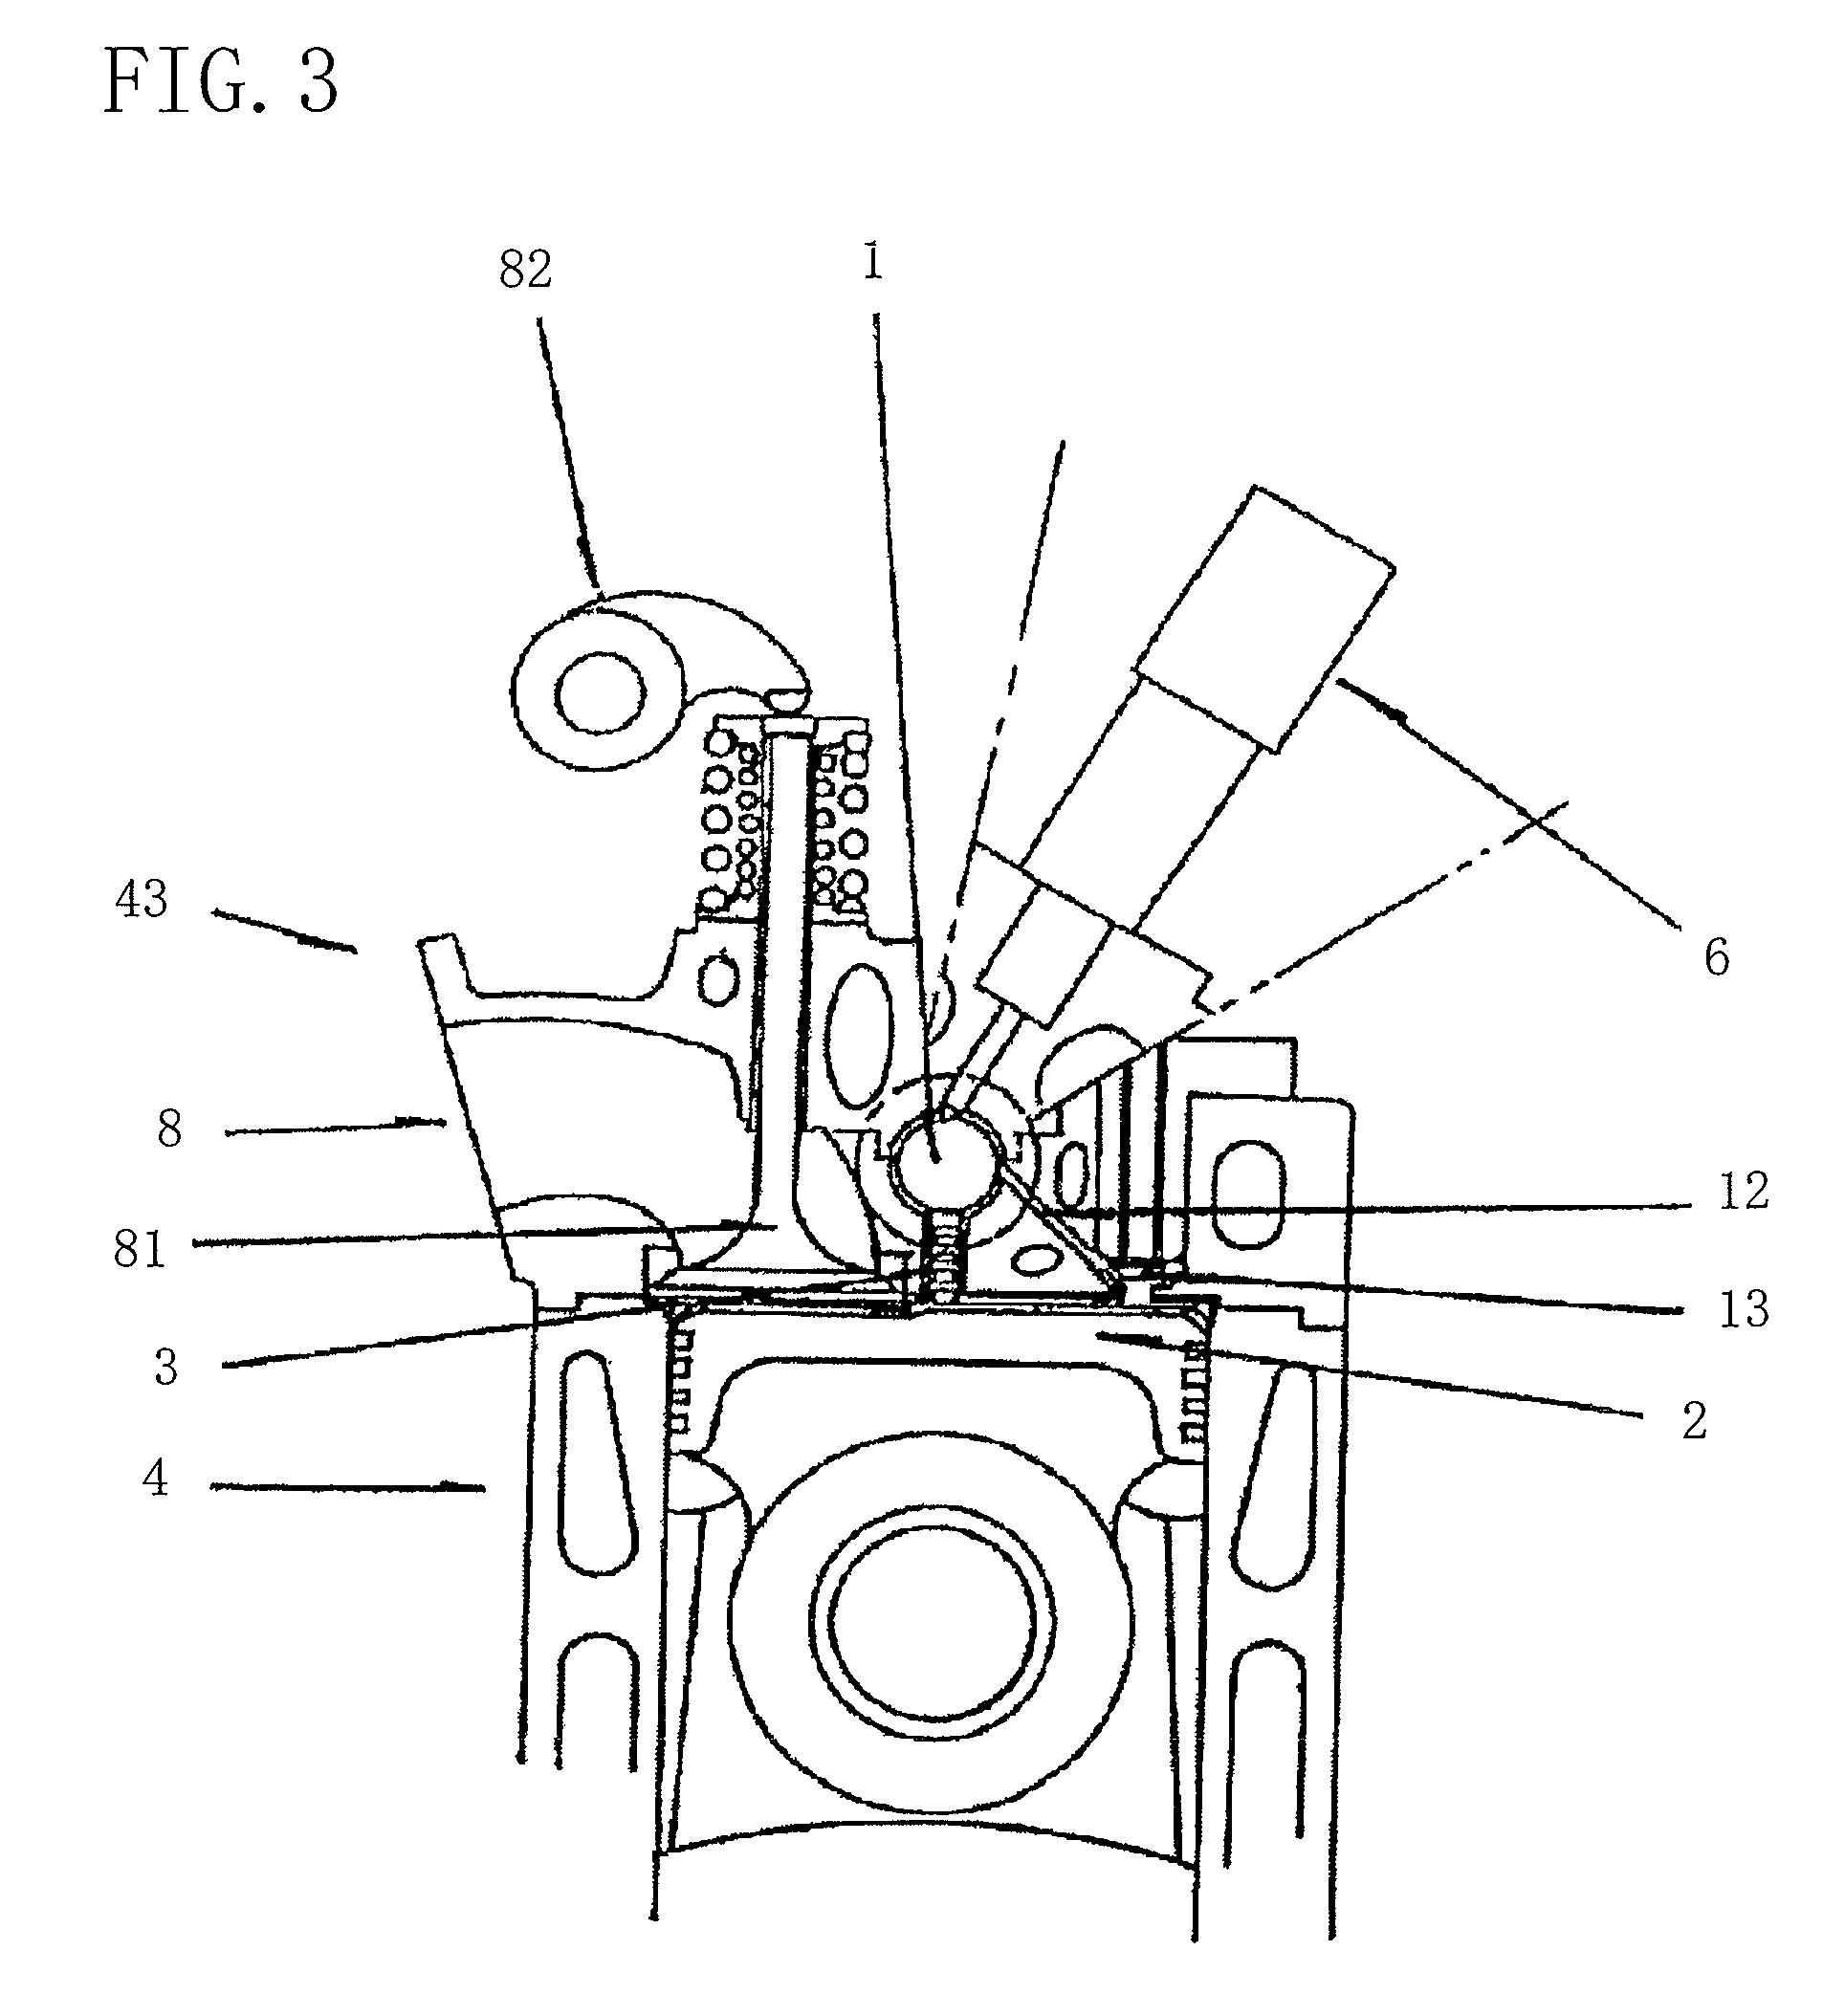 Independent combustion chamber-type internal combustion engine